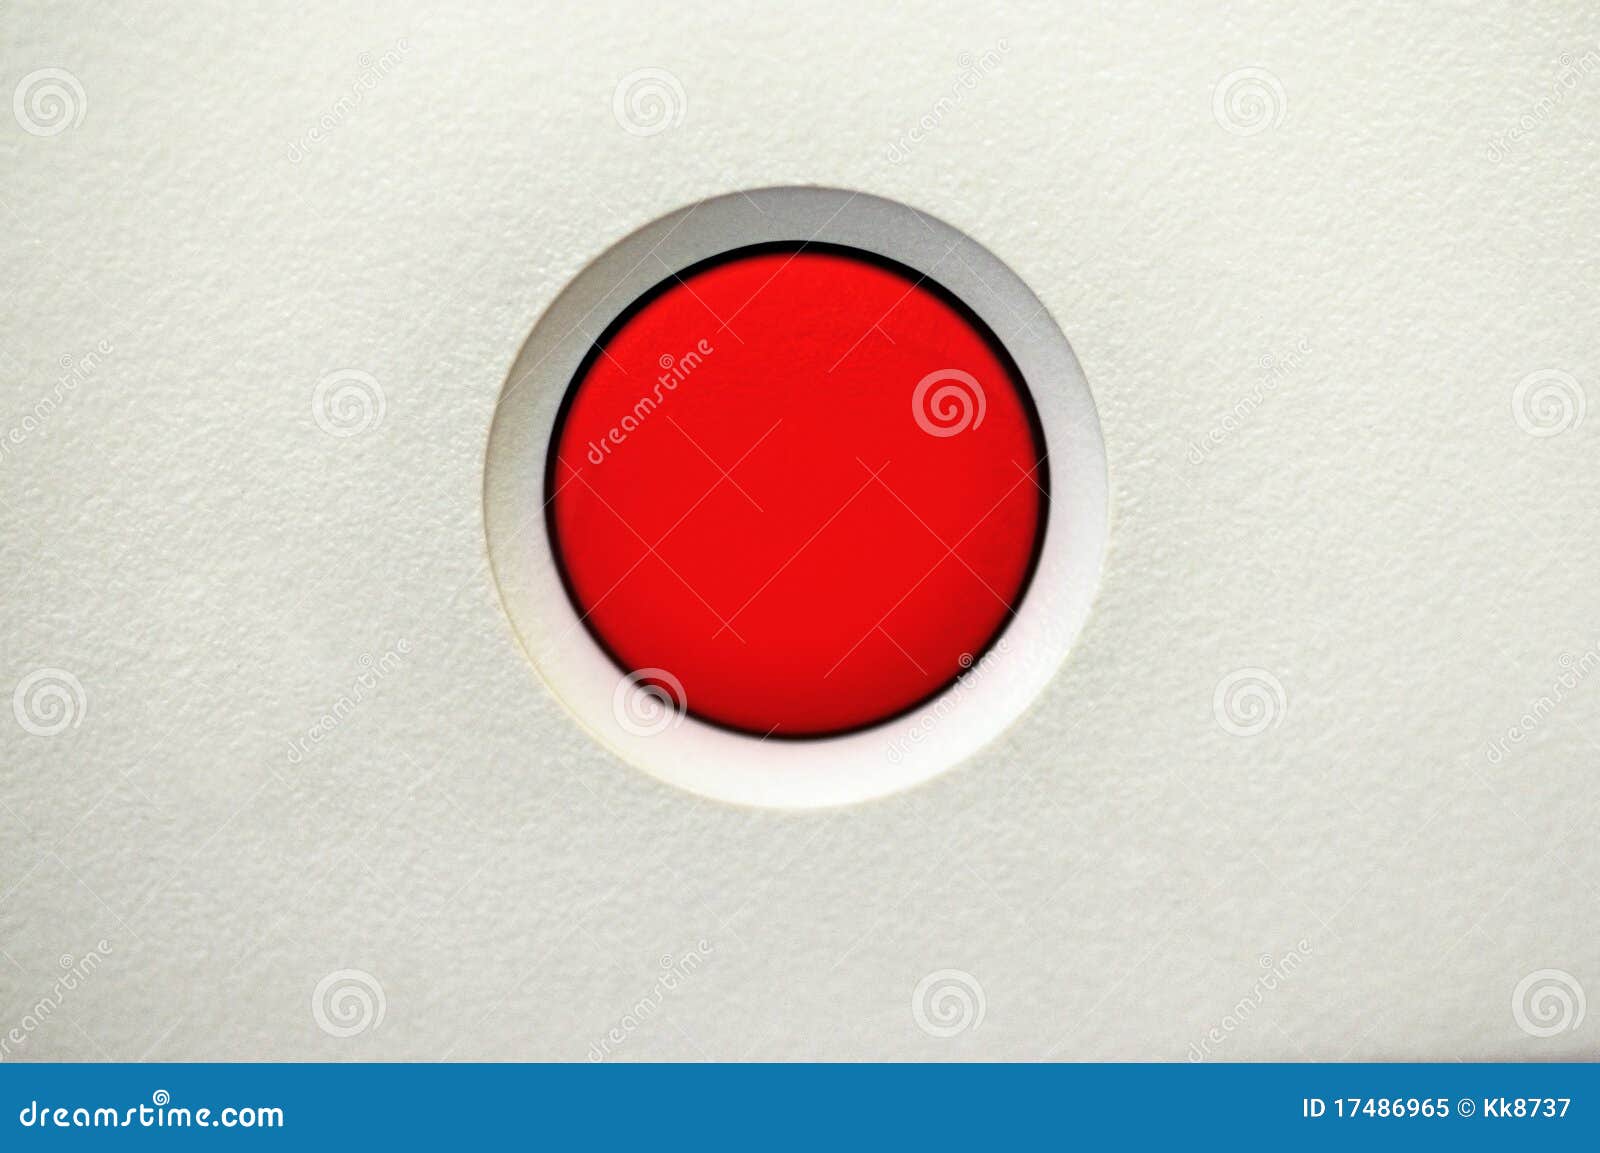 red switch button